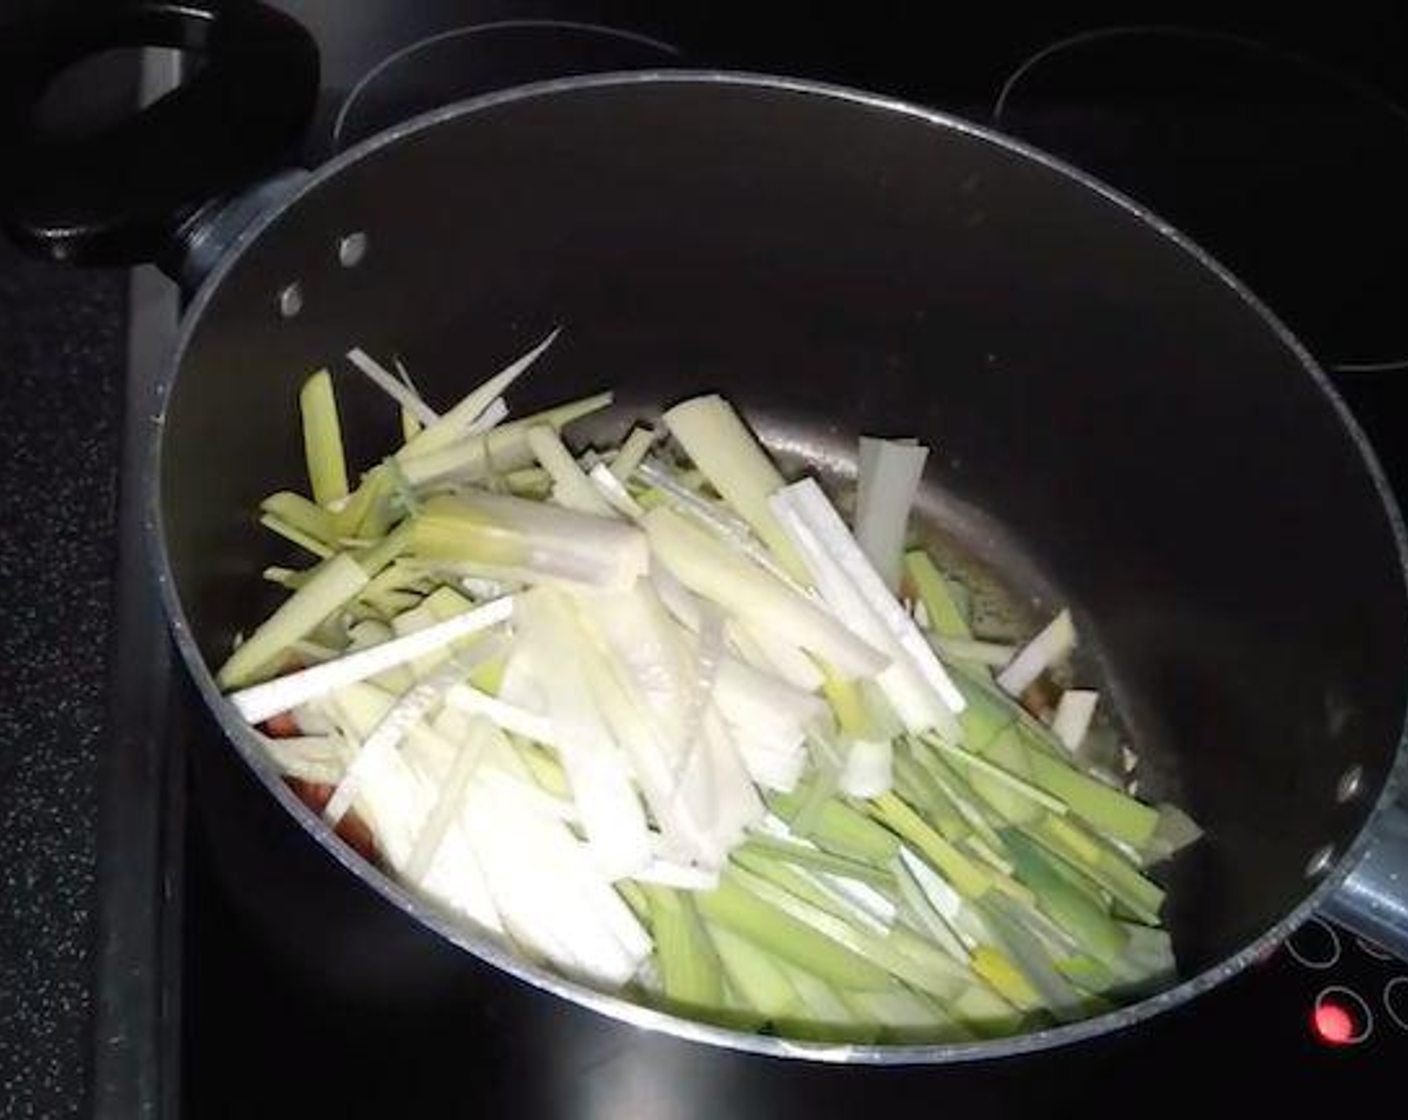 step 6 In a pan add the Butter (3 Tbsp) and melt it. Add the vegetables and fry them for few minutes.